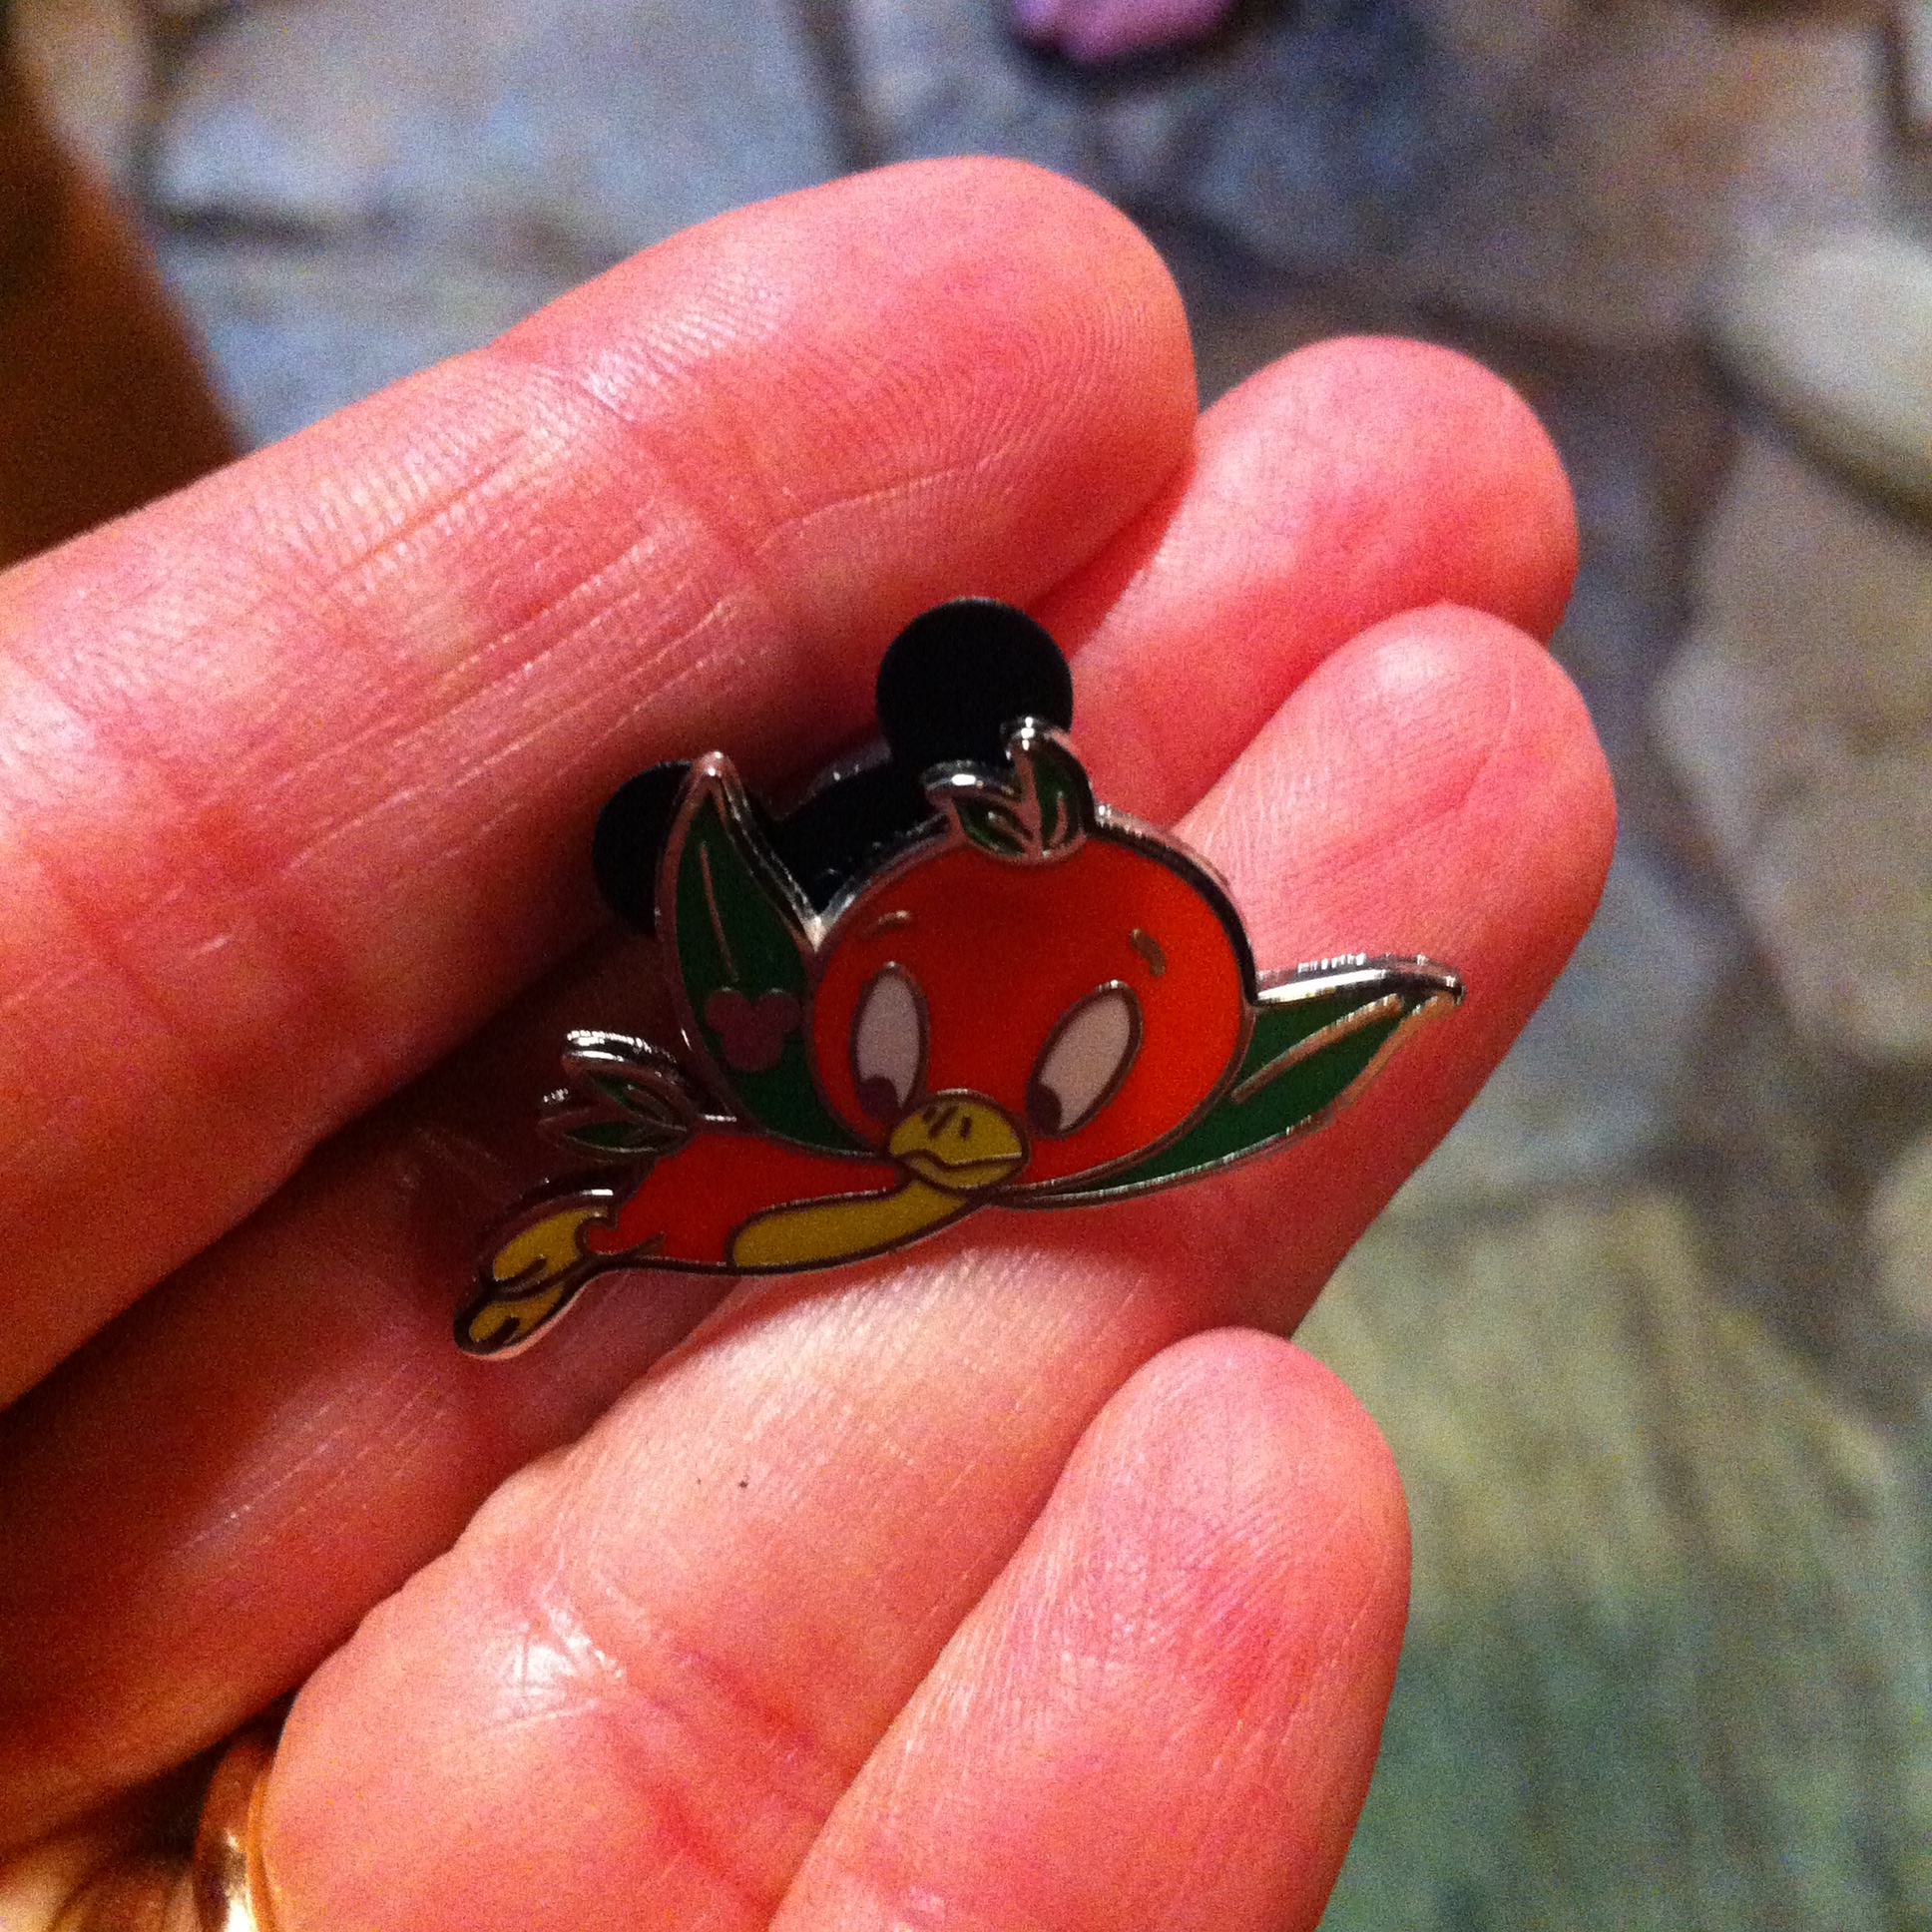 Disney Pin Trading - Tips from the Magical Divas and Devos